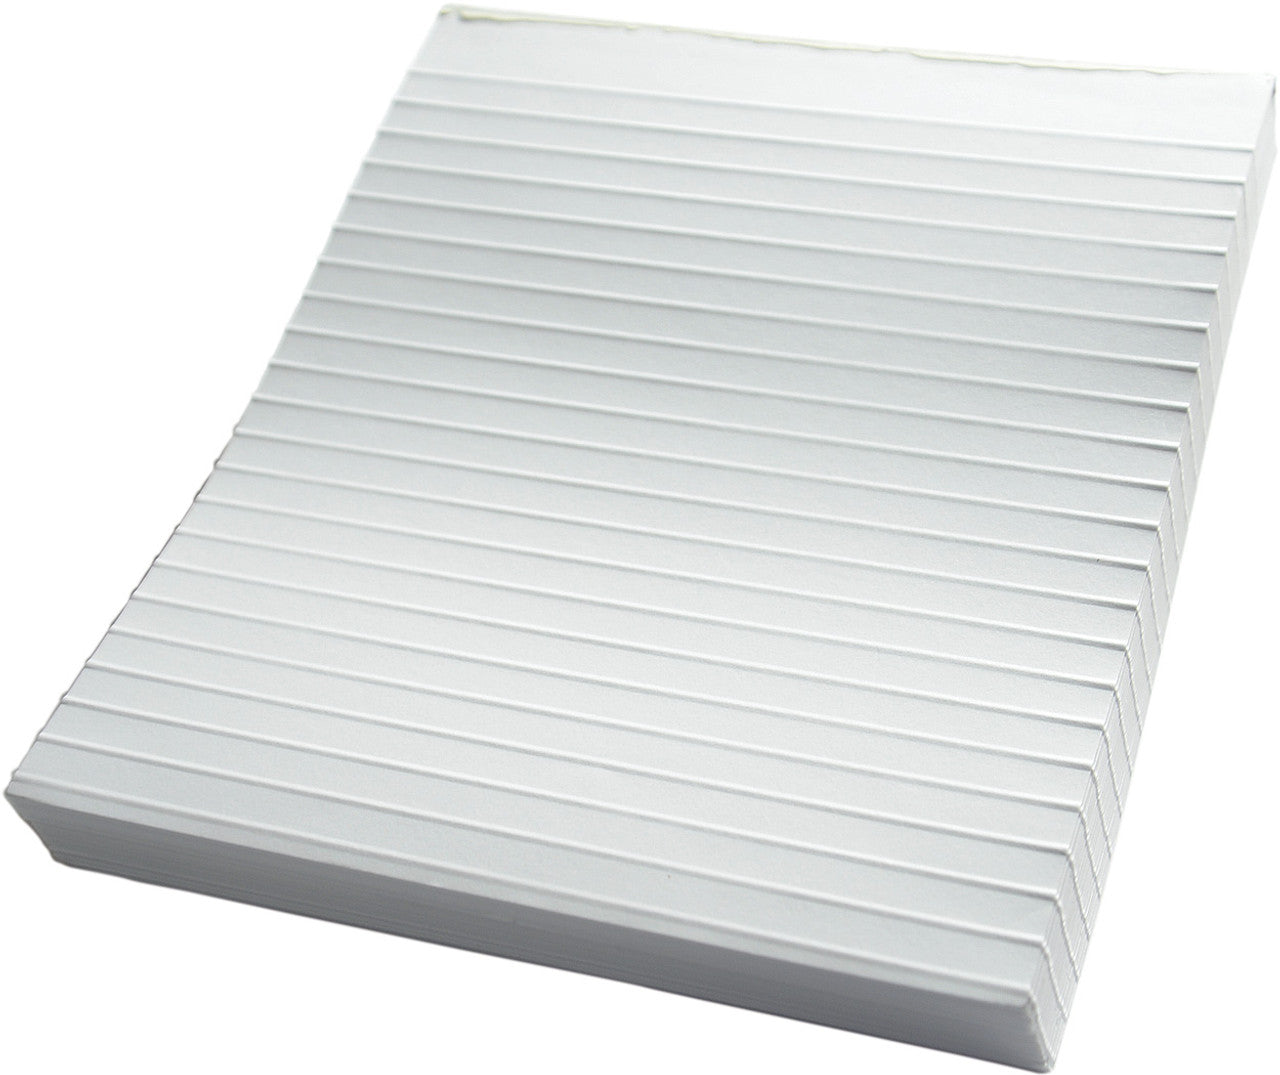 Raised Line Writing Paper.  Heavy raised lines on 8.75 x 10.5 inch sheets of paper help the user feel the lines when writing. Approximately 165 sheets per pad. 